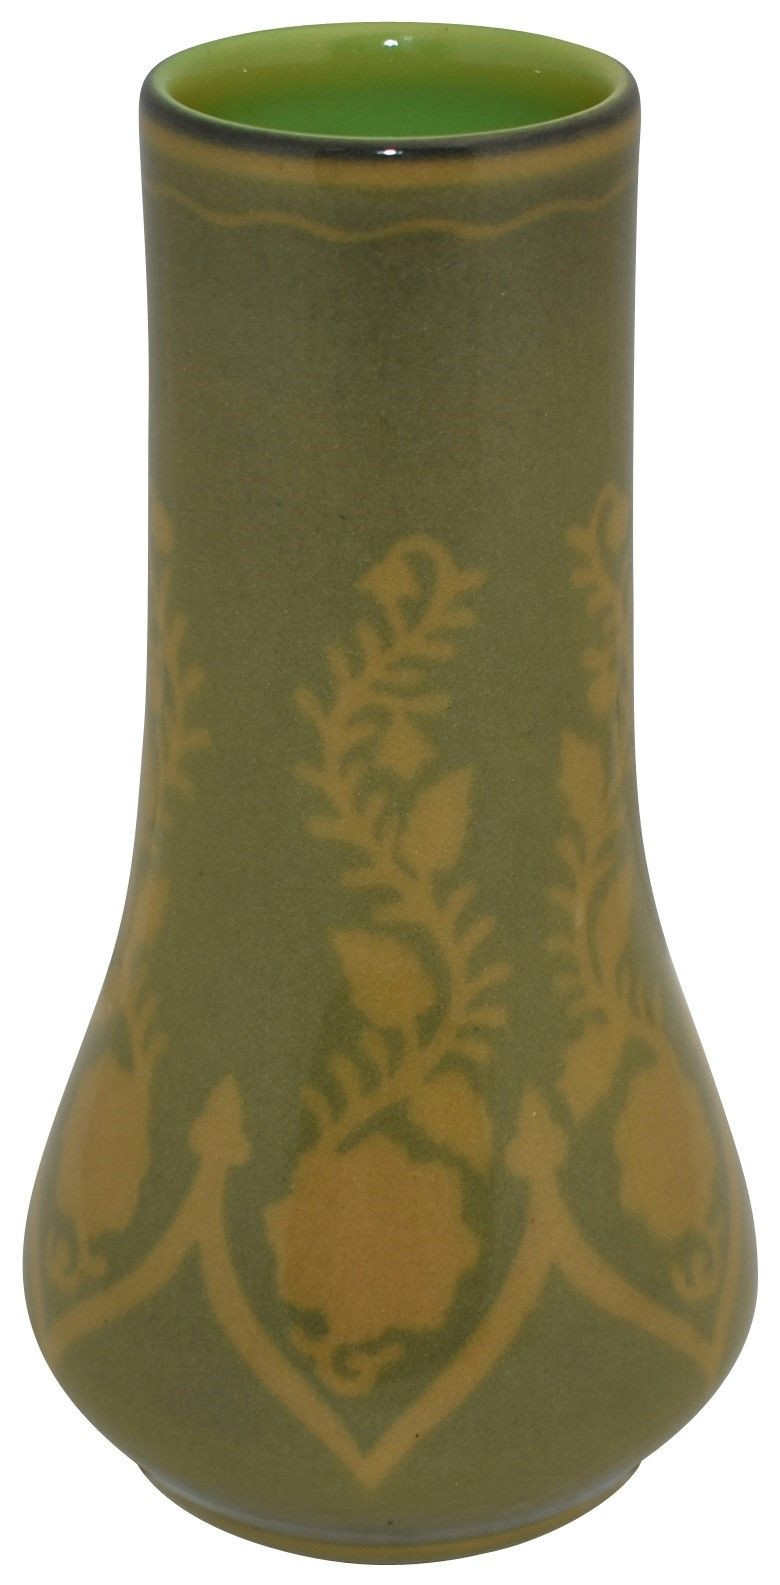 ceramic rain boot vase of rookwood pottery 1918 porcelain green yellow tint floral vase 1278f with rookwood pottery 1918 porcelain green yellow tint floral vase 1278f conant